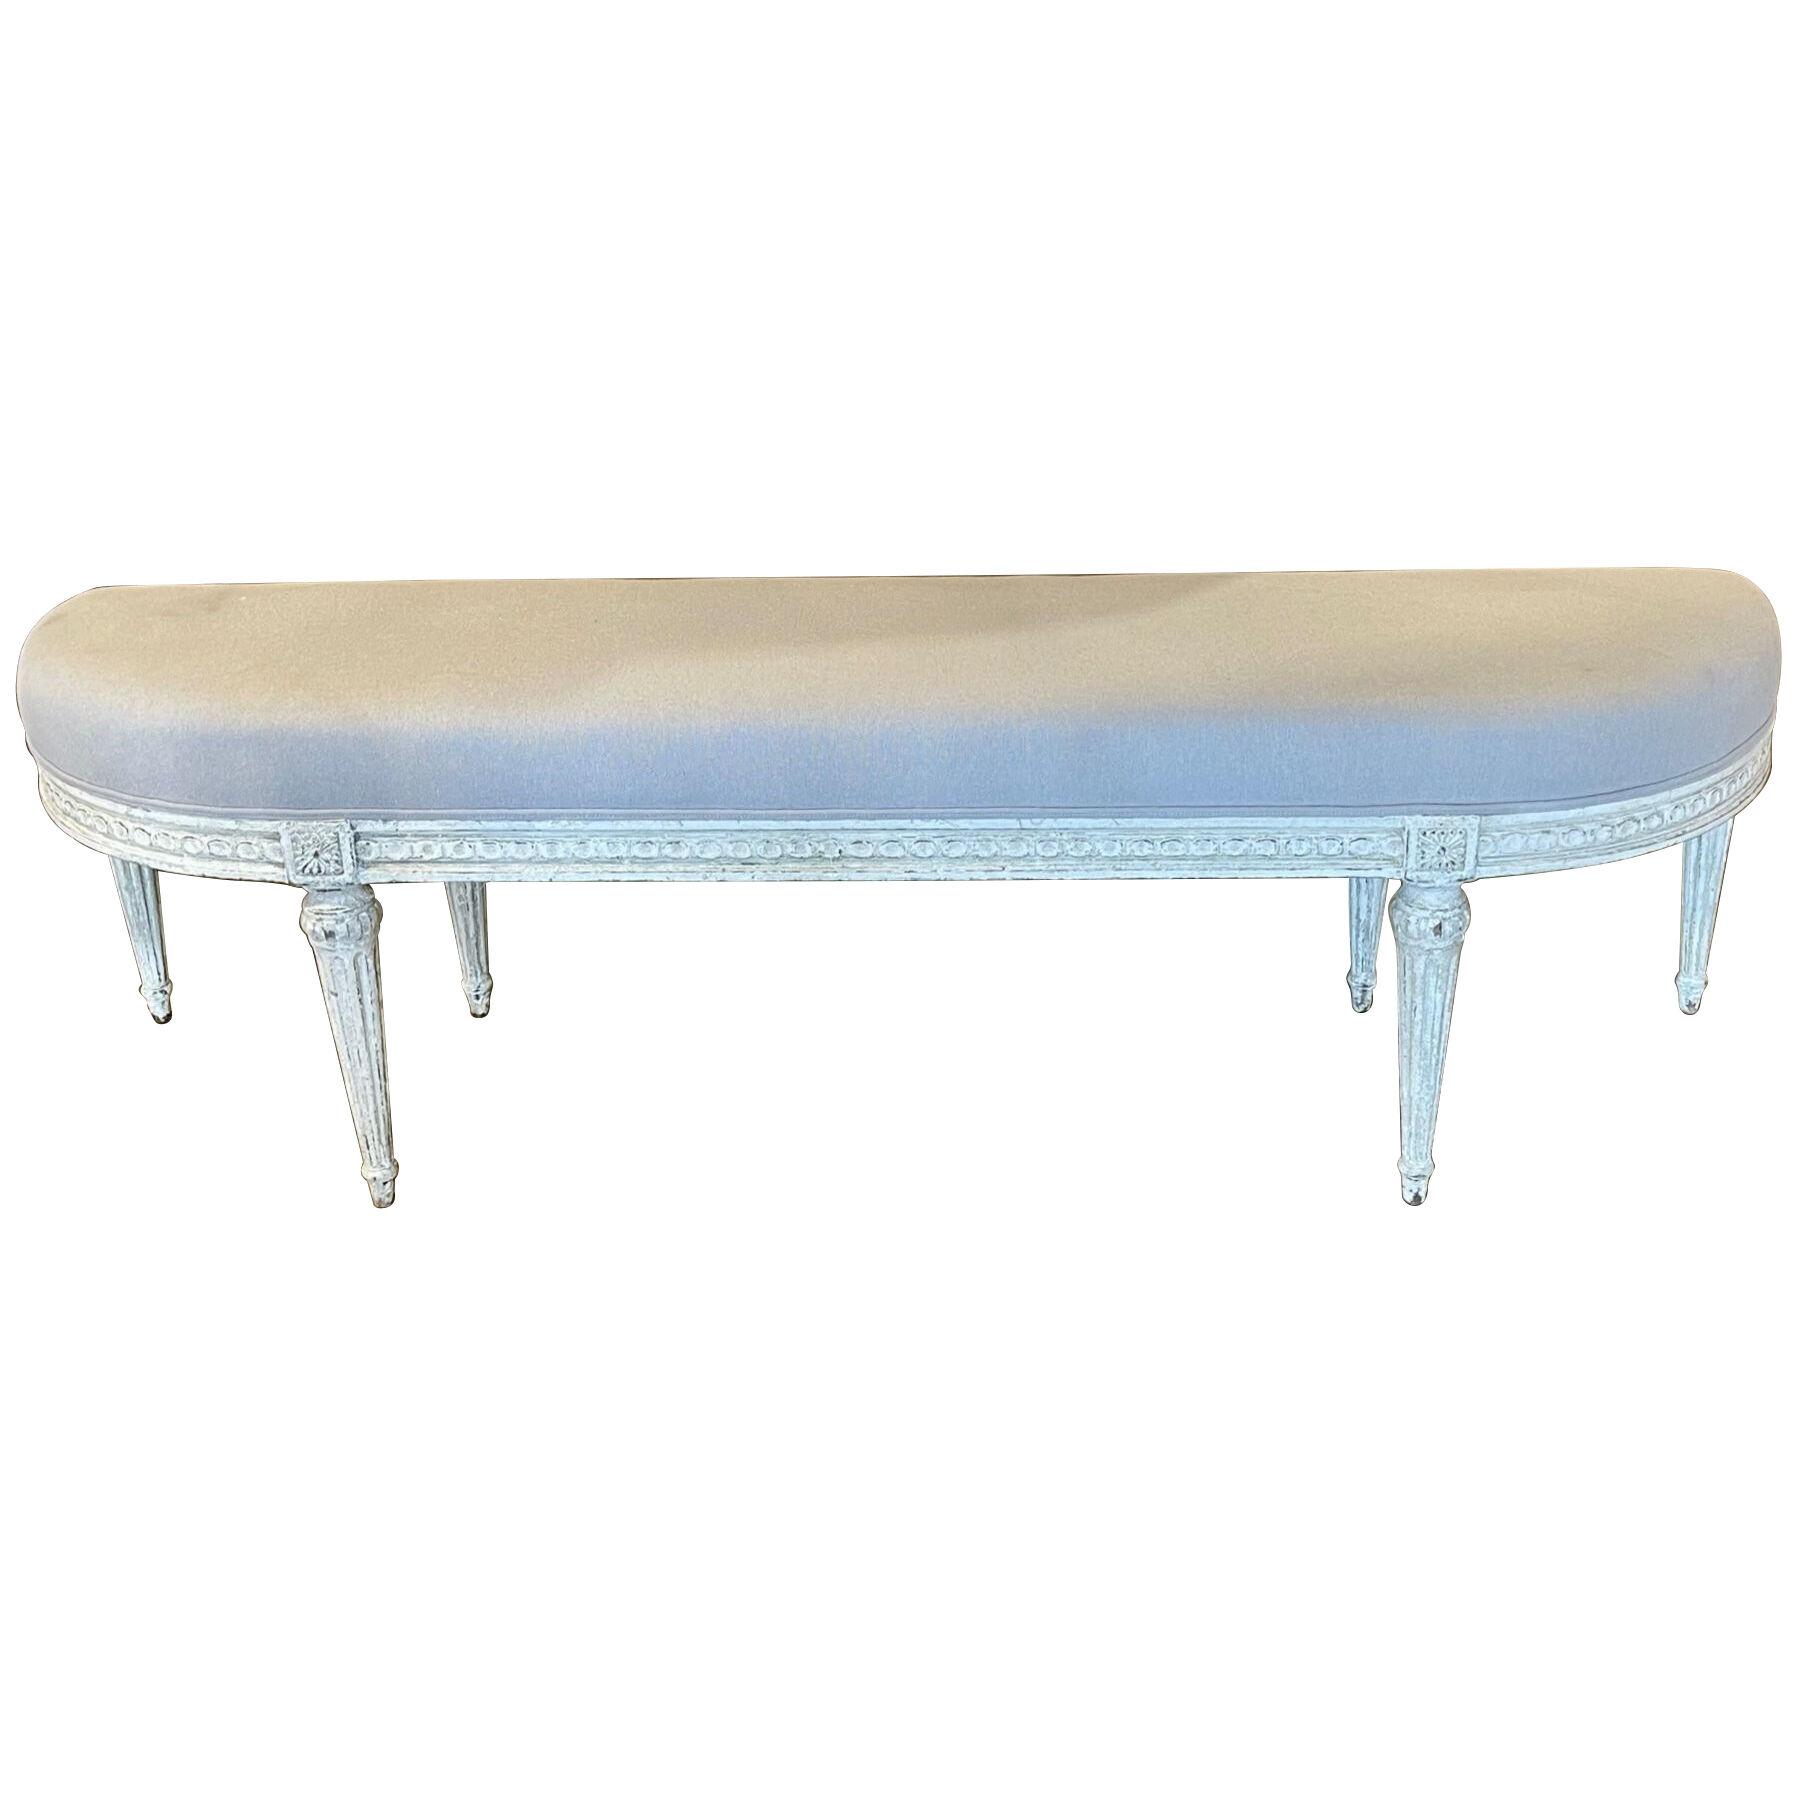 19th Century French Louis XVI Style Carved and Painted Benches